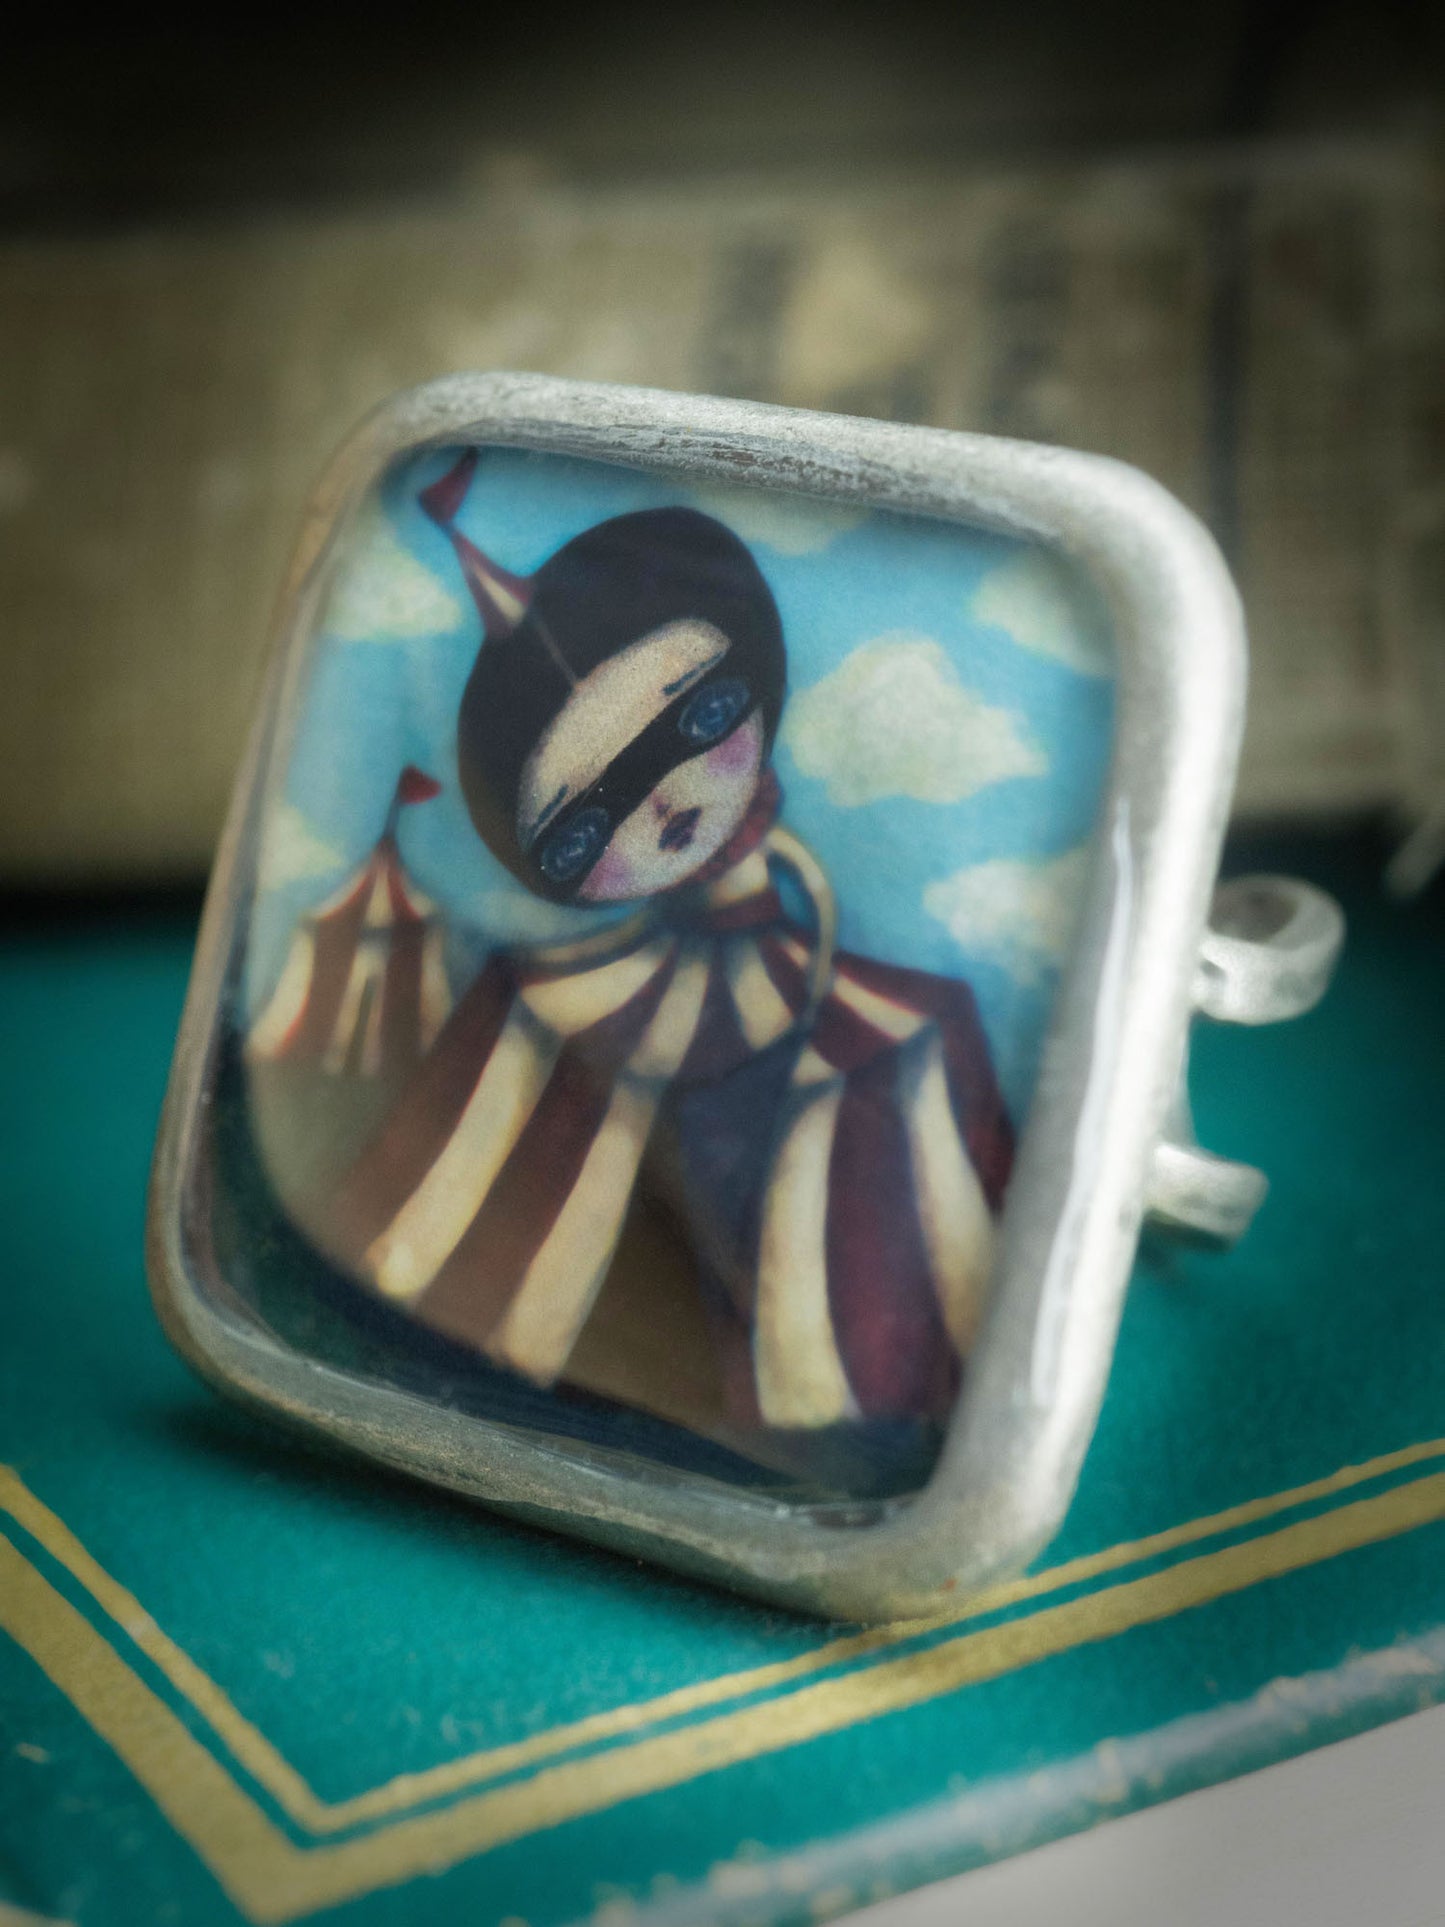 Danita creates beautiful one of a kind pieces of handcrafted jewelry like this square ring with a surreal circus image from Danita.